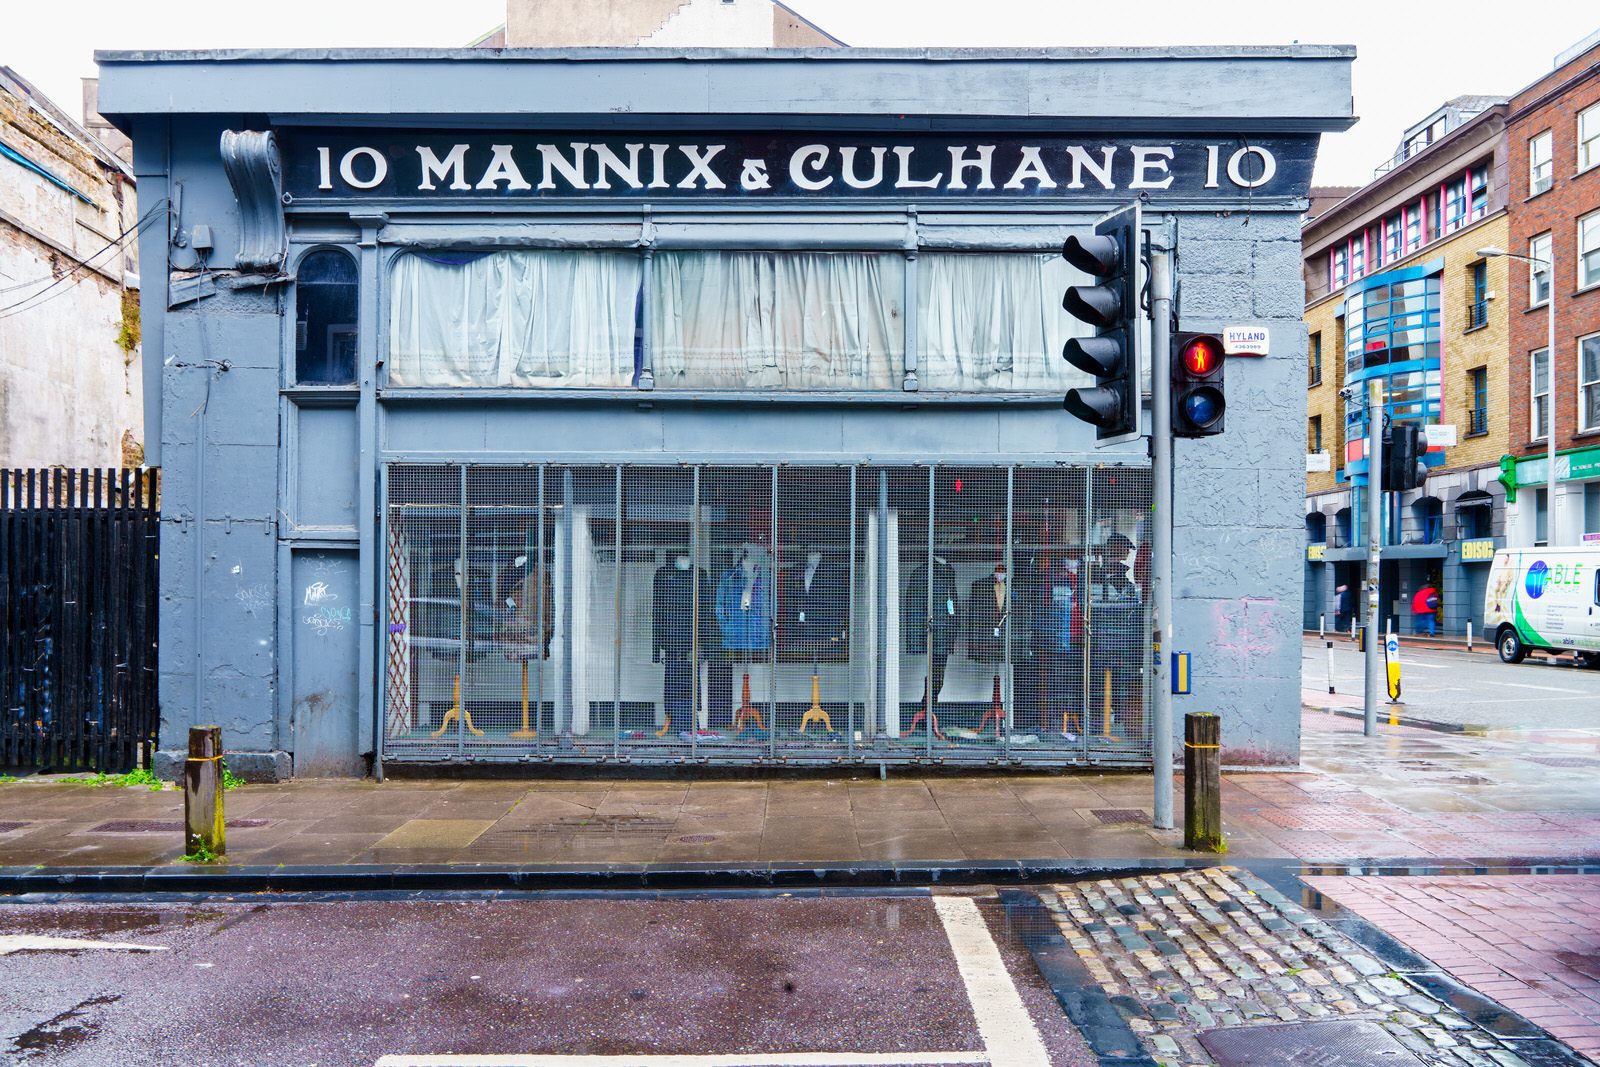 MANNIX AND CULHANE AT THE CORNER [WASHINGTON STREET AND SOUTH MAIN STREET] 002